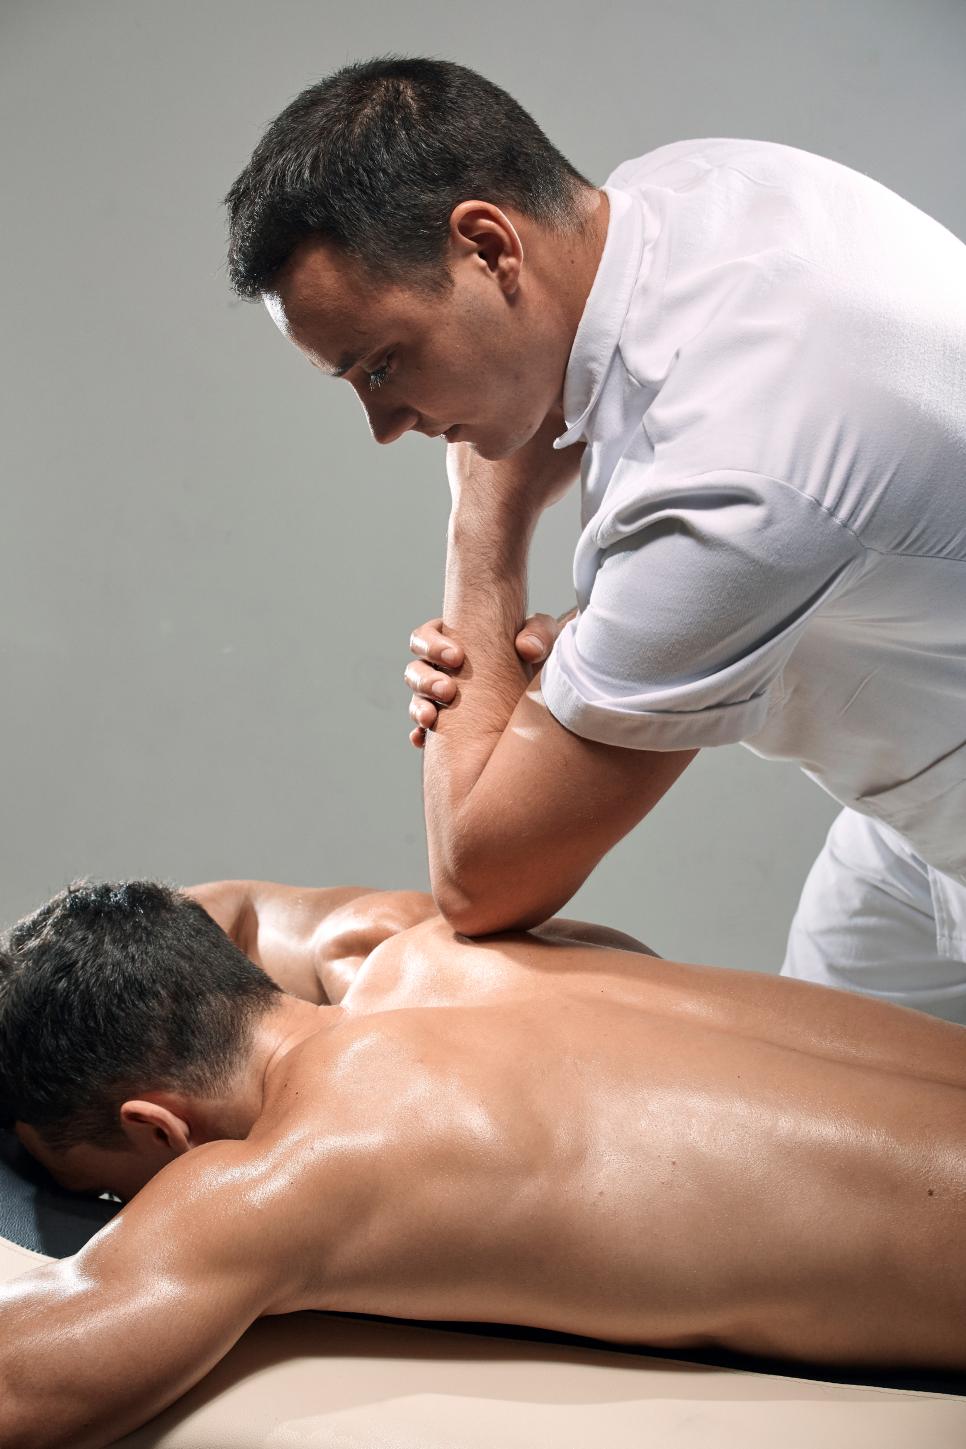 two young man, 20-29 years old, sports physiotherapy indoors in studio, photo shoot. Physiotherapist massaging muscular patient back with his elbow.